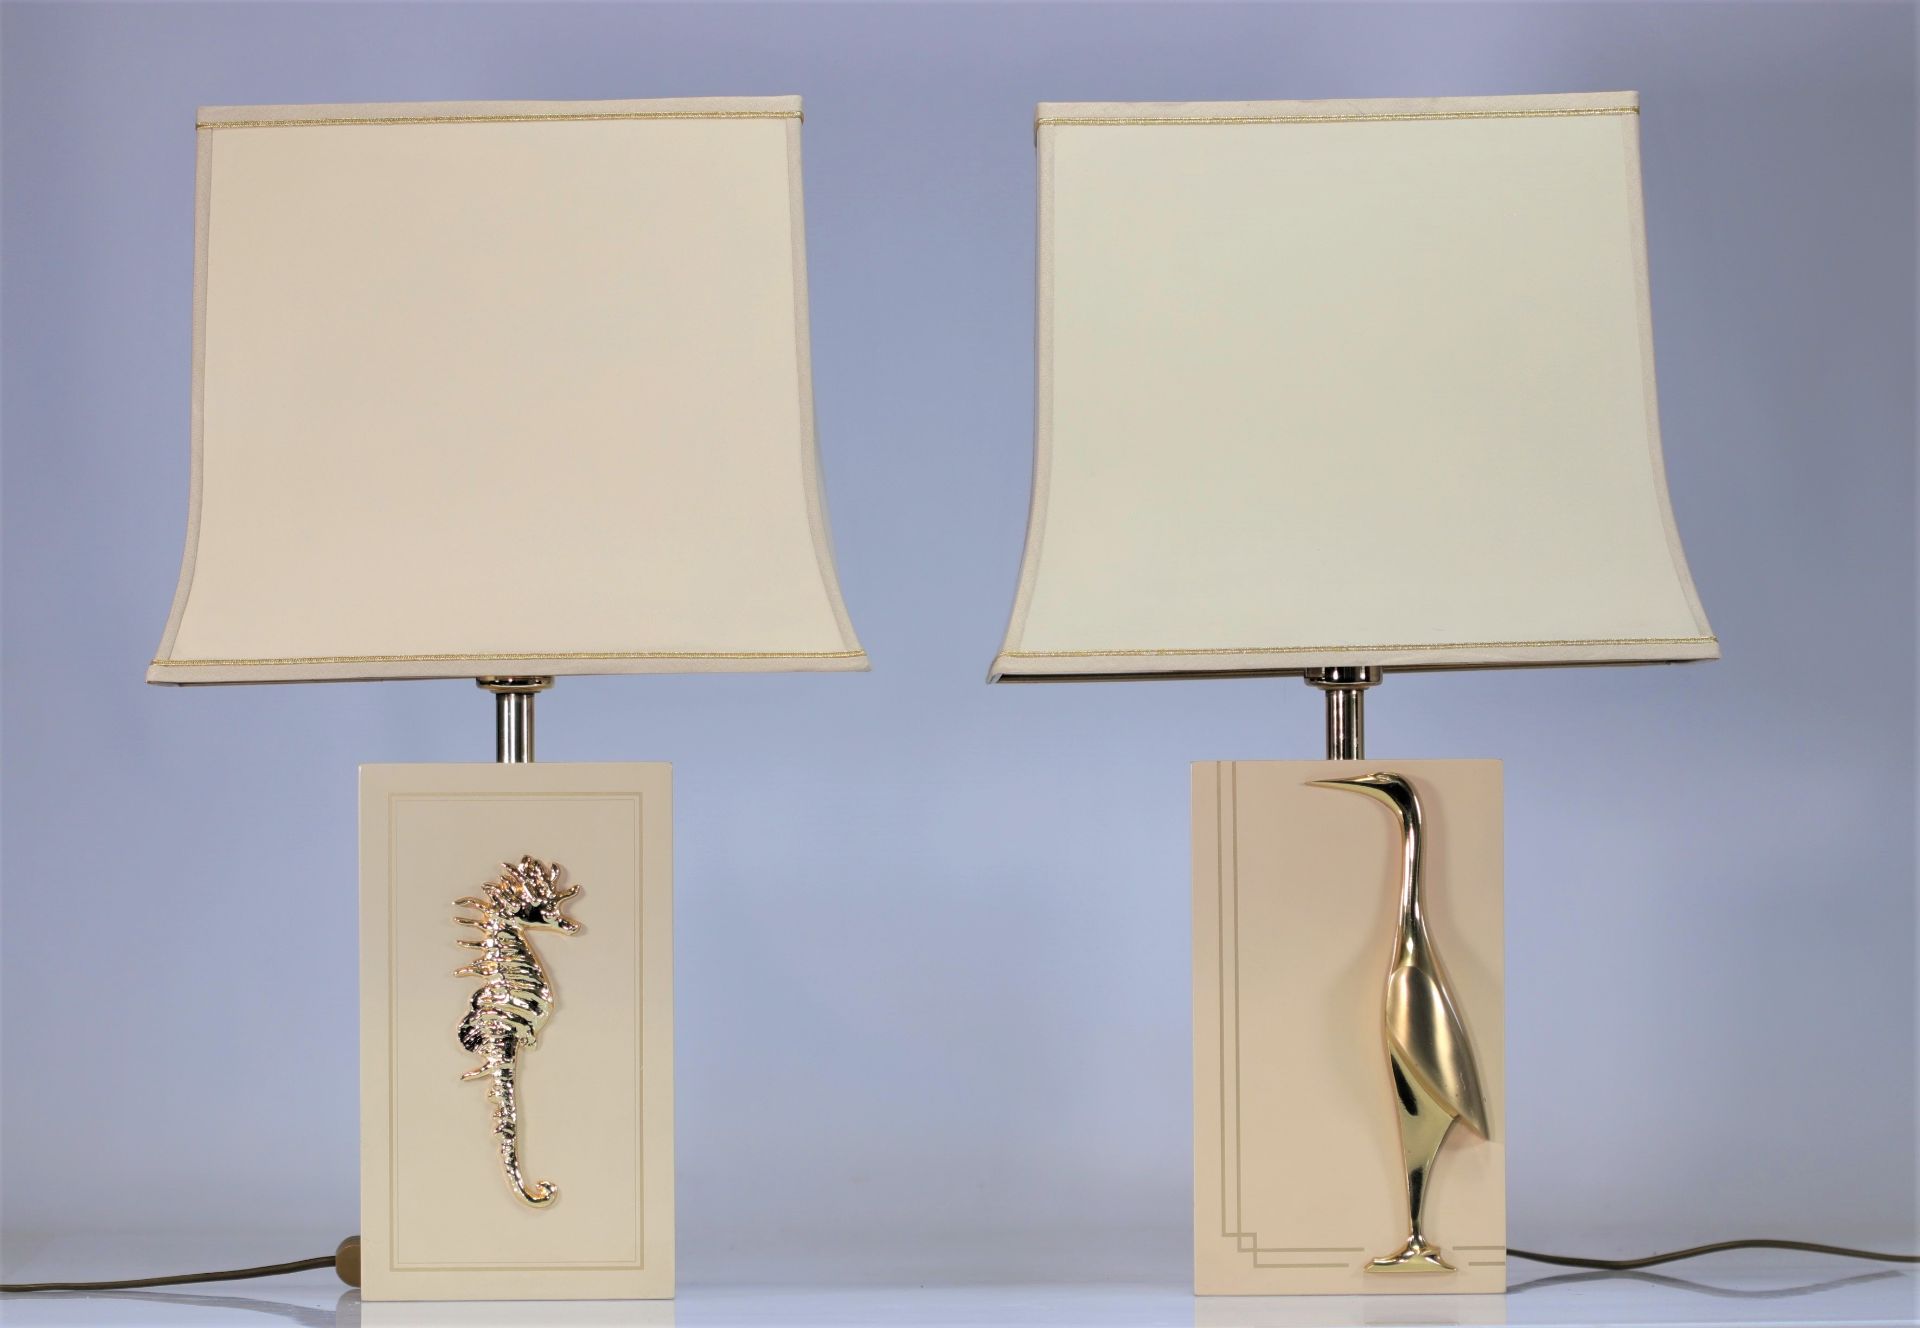 (2) Pair of lamps with lacquered feet decorated with seahorses and waders, 1970s - Image 2 of 5